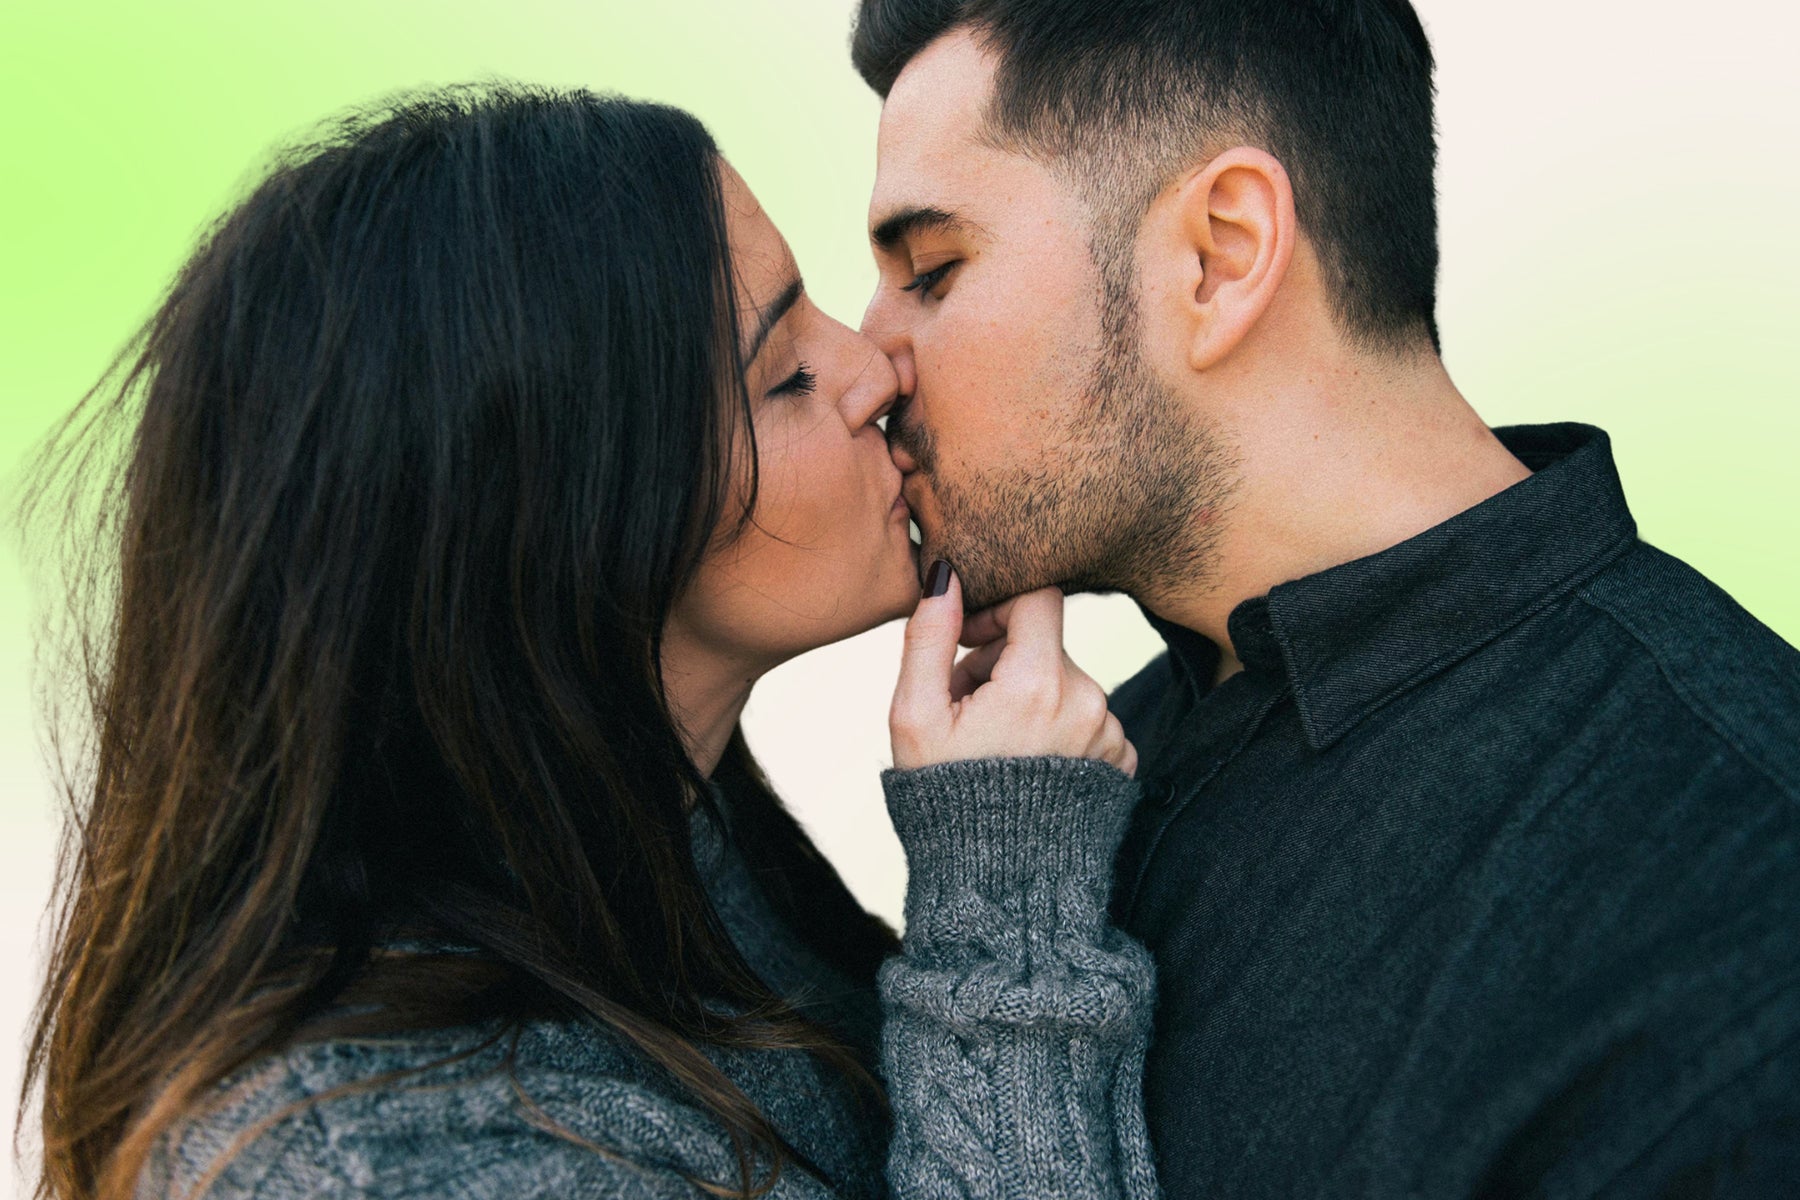 The power of a kiss: women share their unforgettable kisses